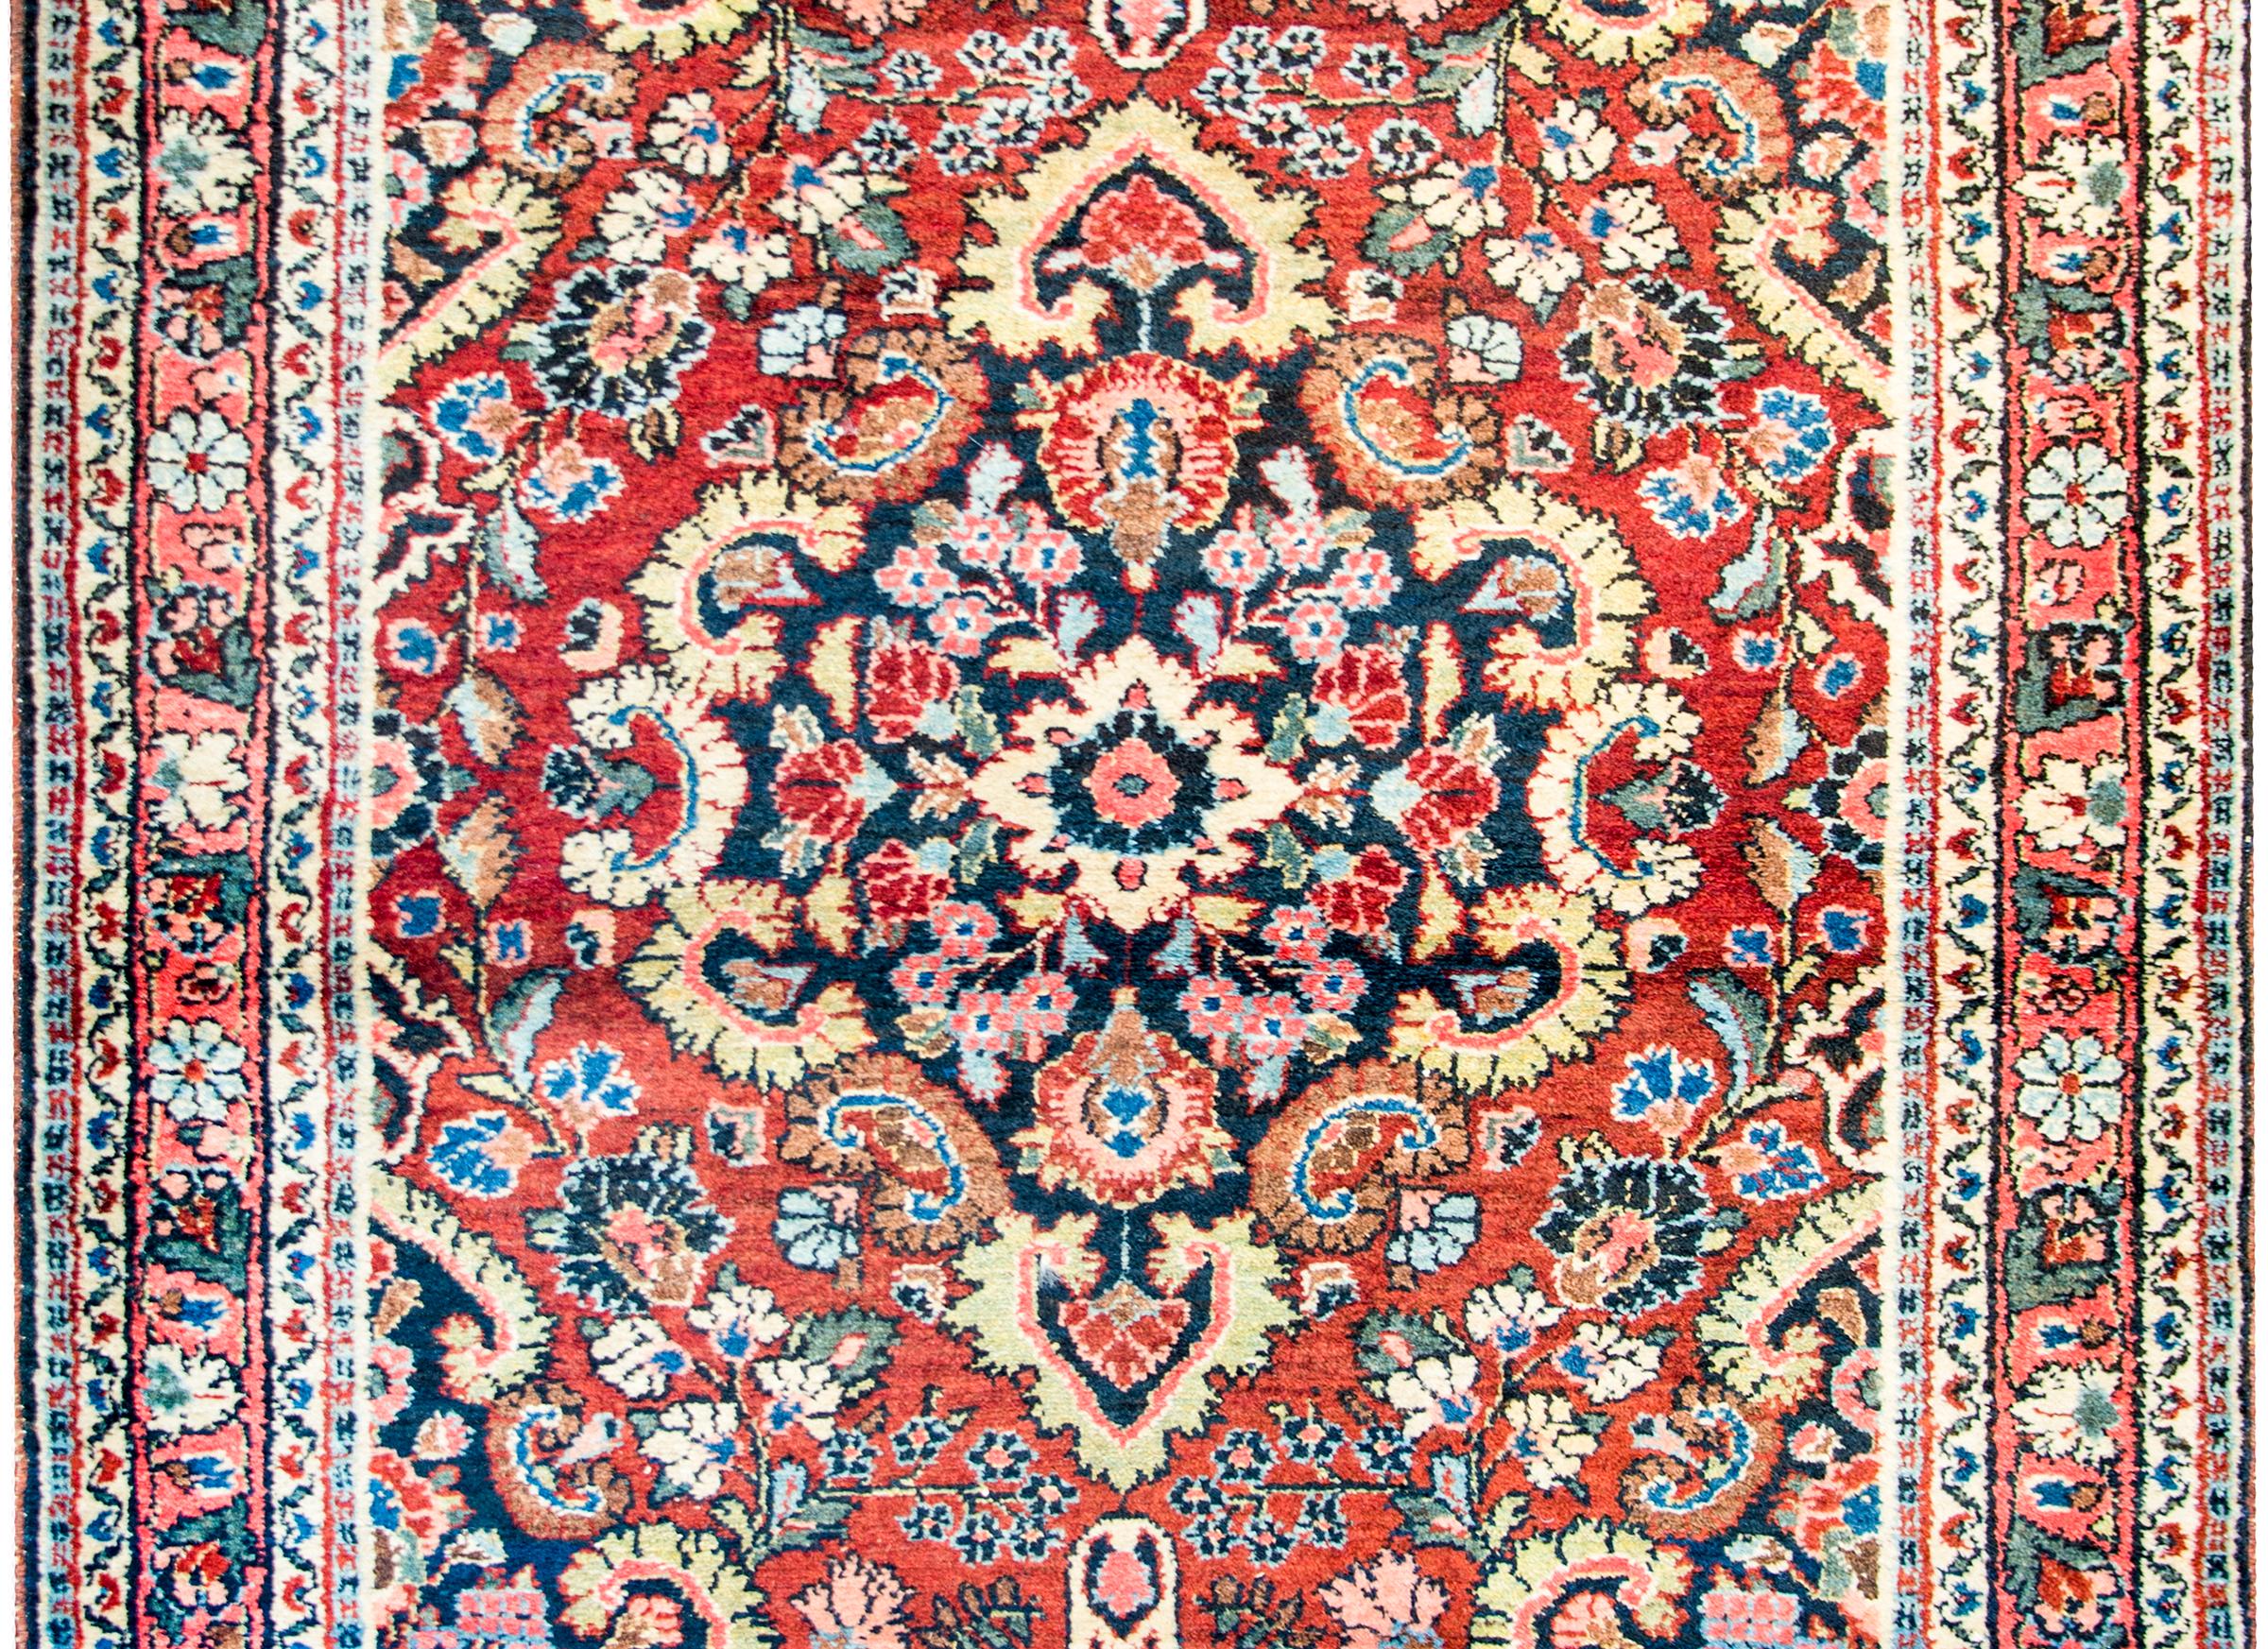 A fantastic early 20th century antique Persian Bibikibad rug with a large central floral medallion woven in bold crimson, pink, light and dark indigo, and cream colored wool on a dark indigo background. The medallion lives amidst a field of densely